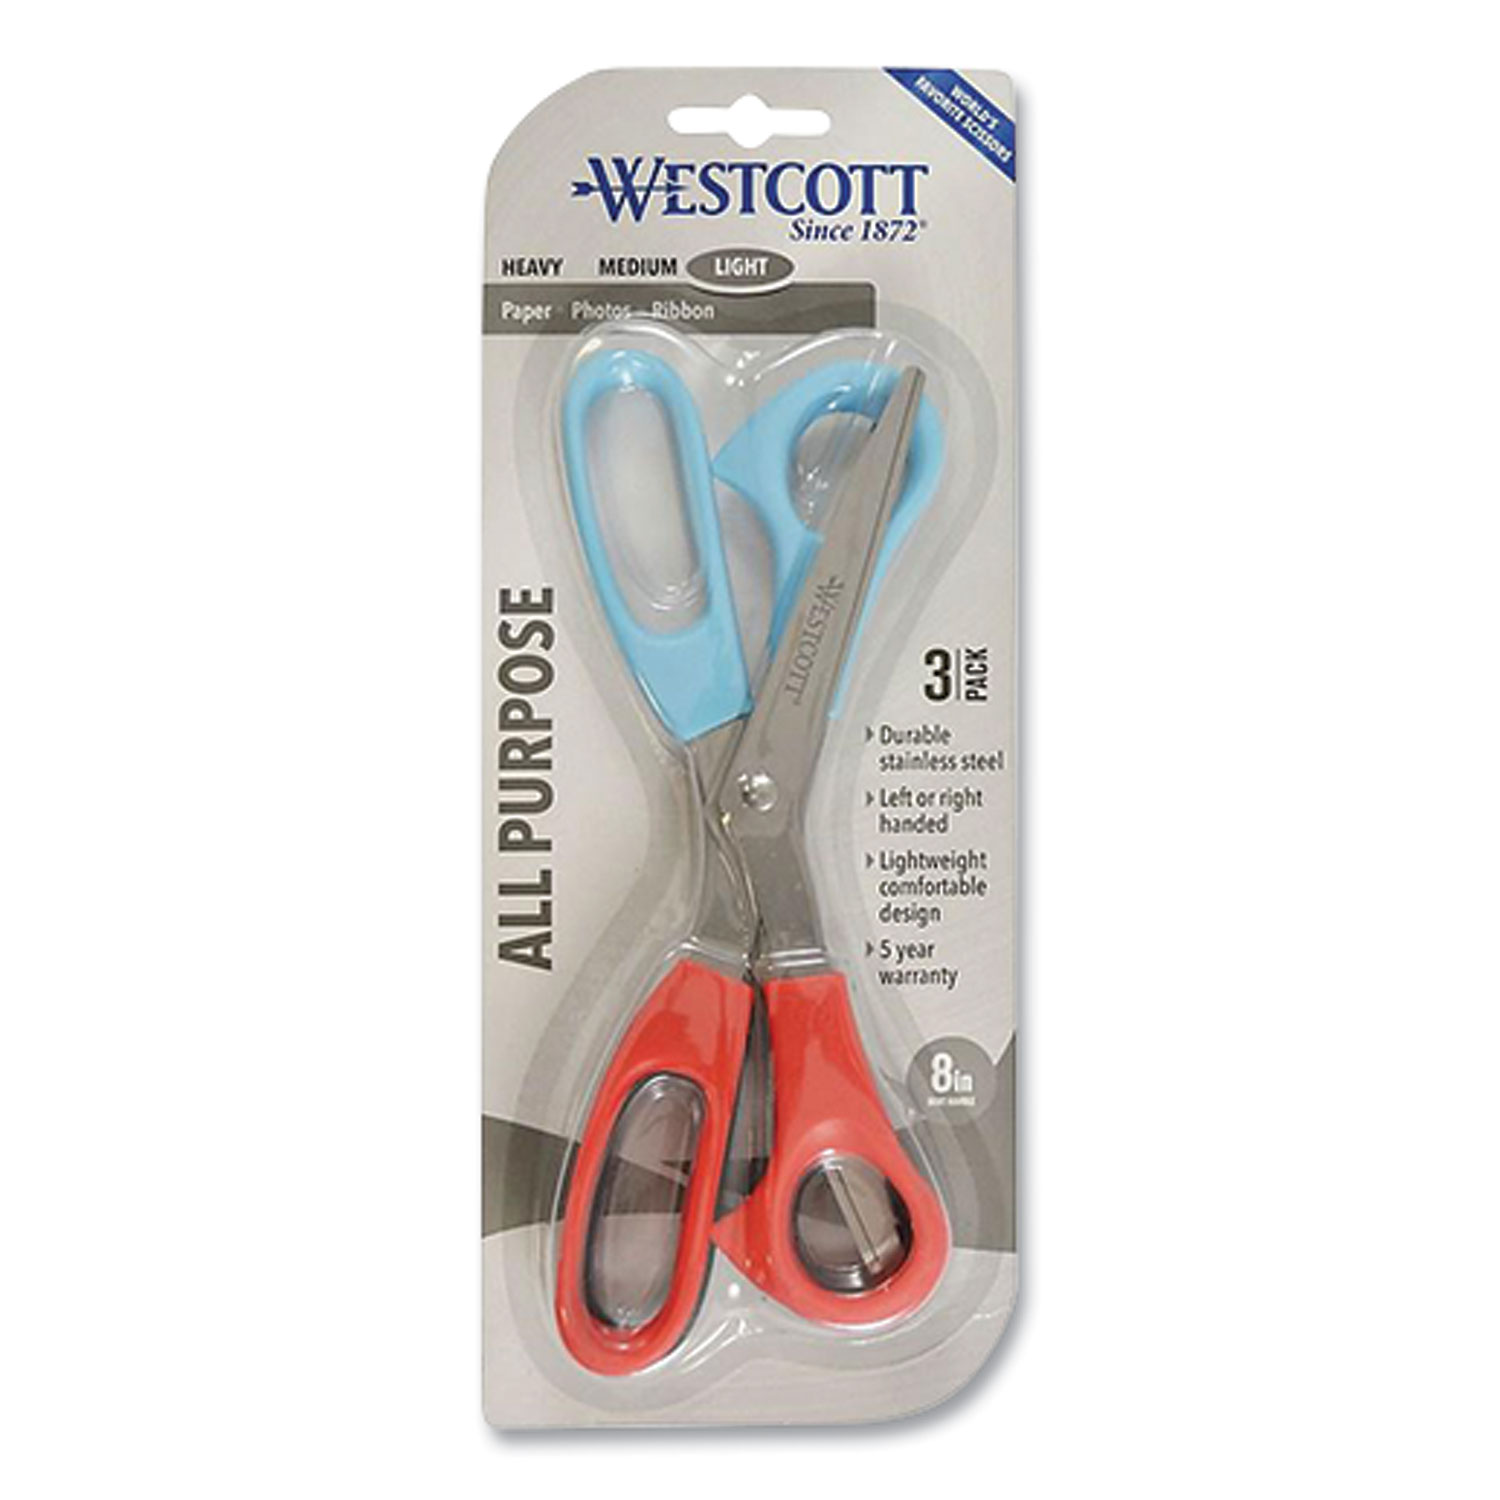  Westcott 13023/13403 All Purpose Value Stainless Steel Scissors Three Pack, 8 Long, 3 Cut Length, Assorted Color Offset Handles, 3/Pack (WTC229690) 